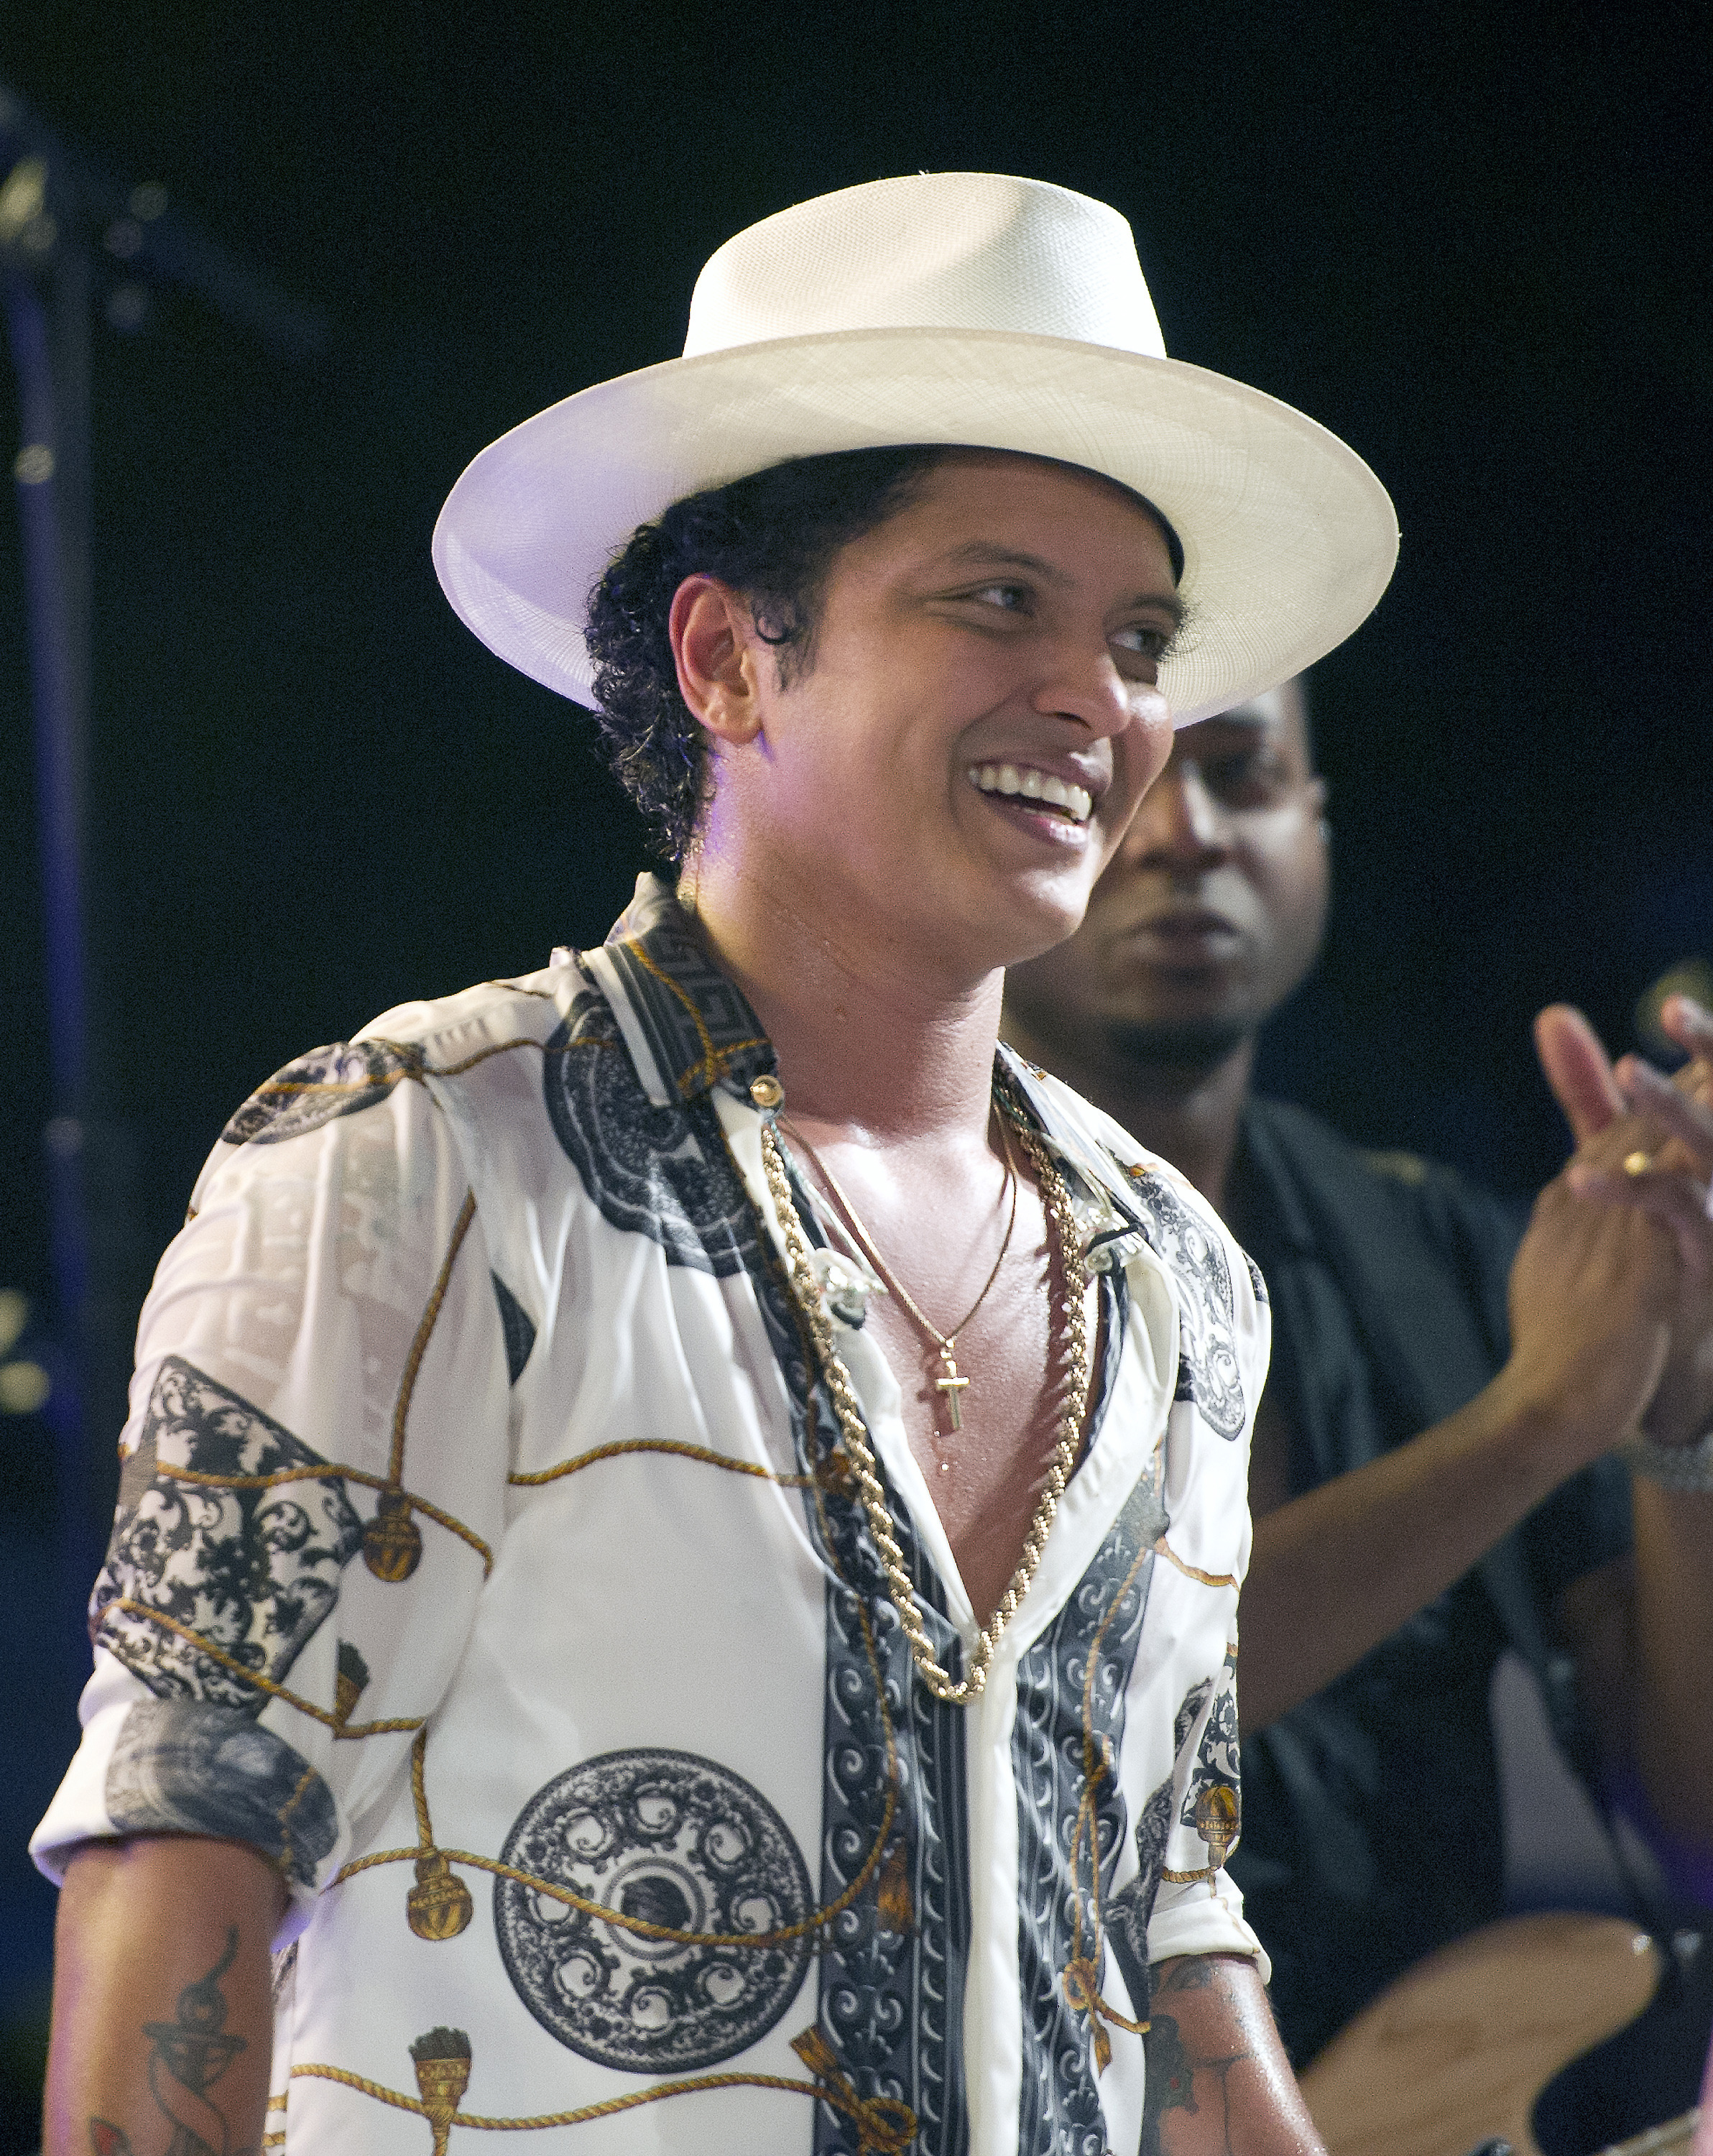 Bruno Mars smiles as President Obama makes remarks to members of the military and White House staff who were invited to the South Lawn of the White House in Washington, DC on July 4, 2015. (Ron Sachs—AP)